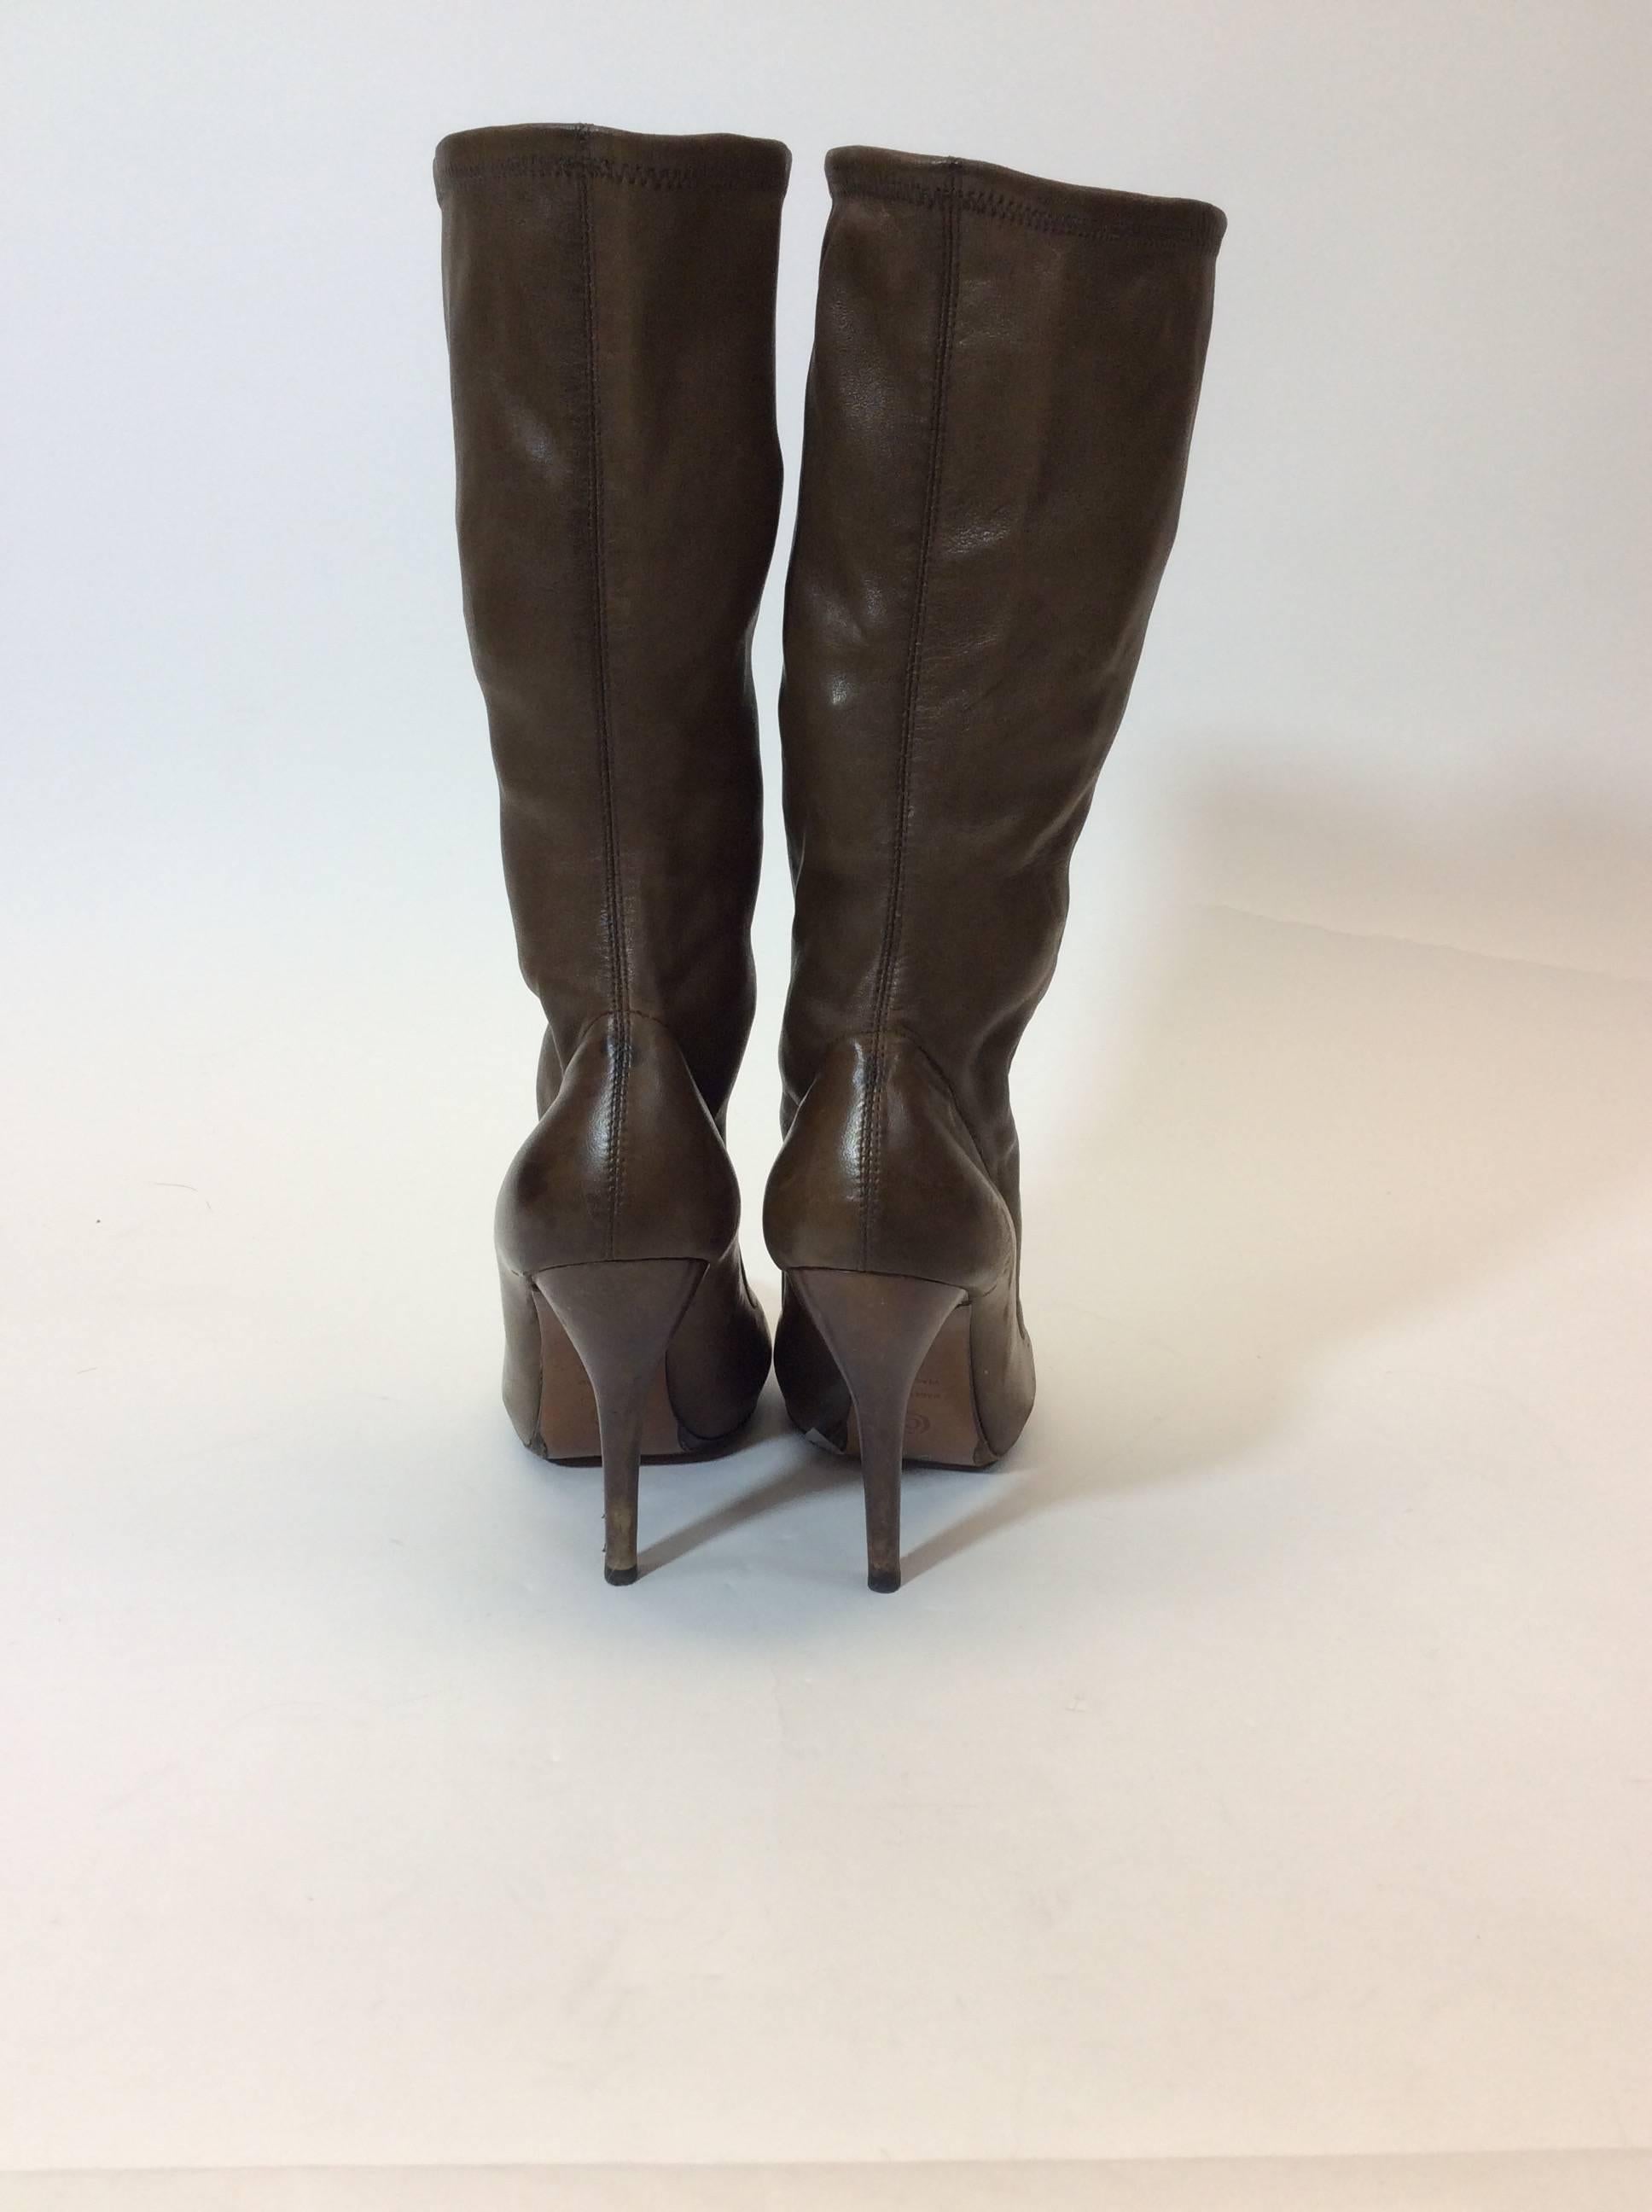 Alexander McQueen Seamless Brown Leather High Heel Boots In Excellent Condition For Sale In Narberth, PA